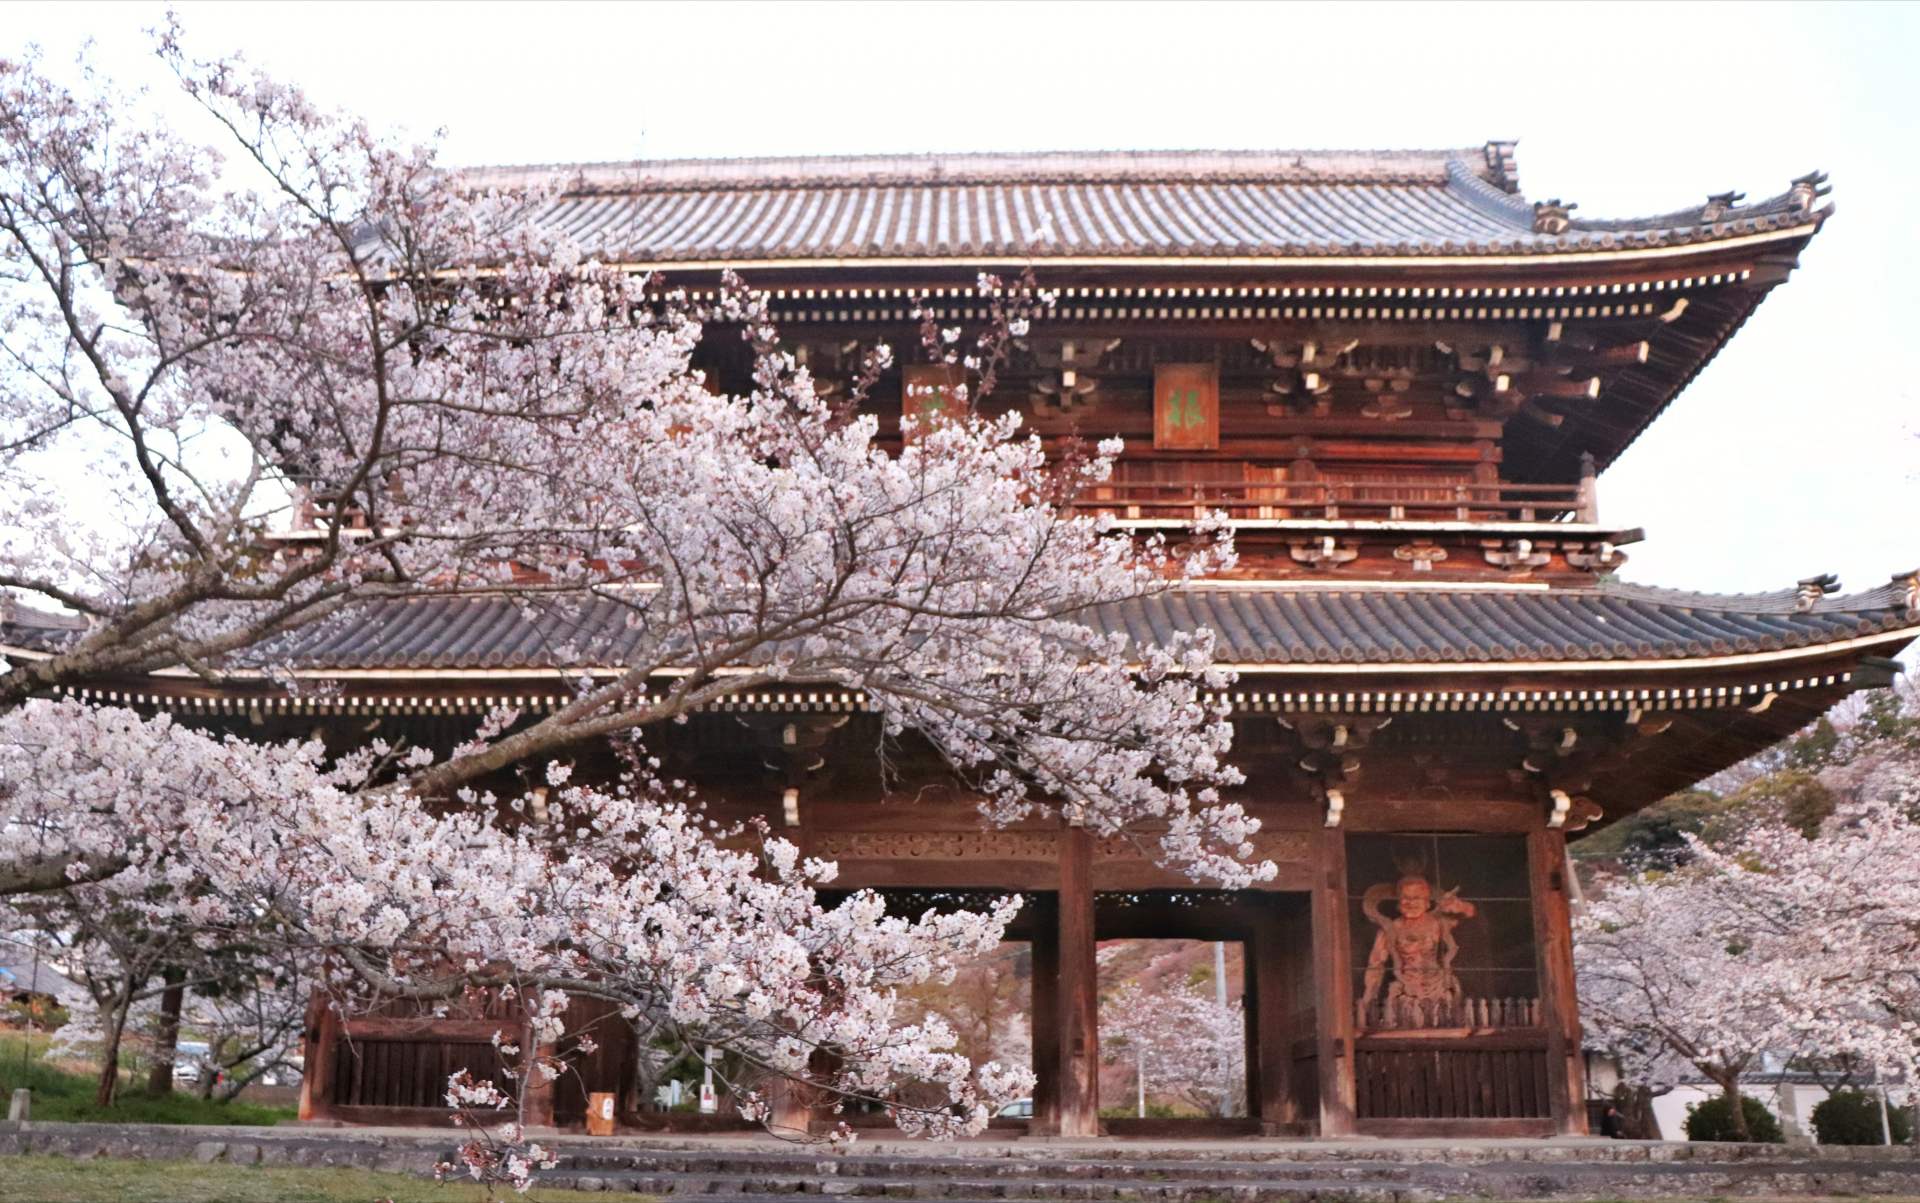 A strikingly beautiful spread of seven thousand glorious cherry blossom trees blooms across the grounds in spring.